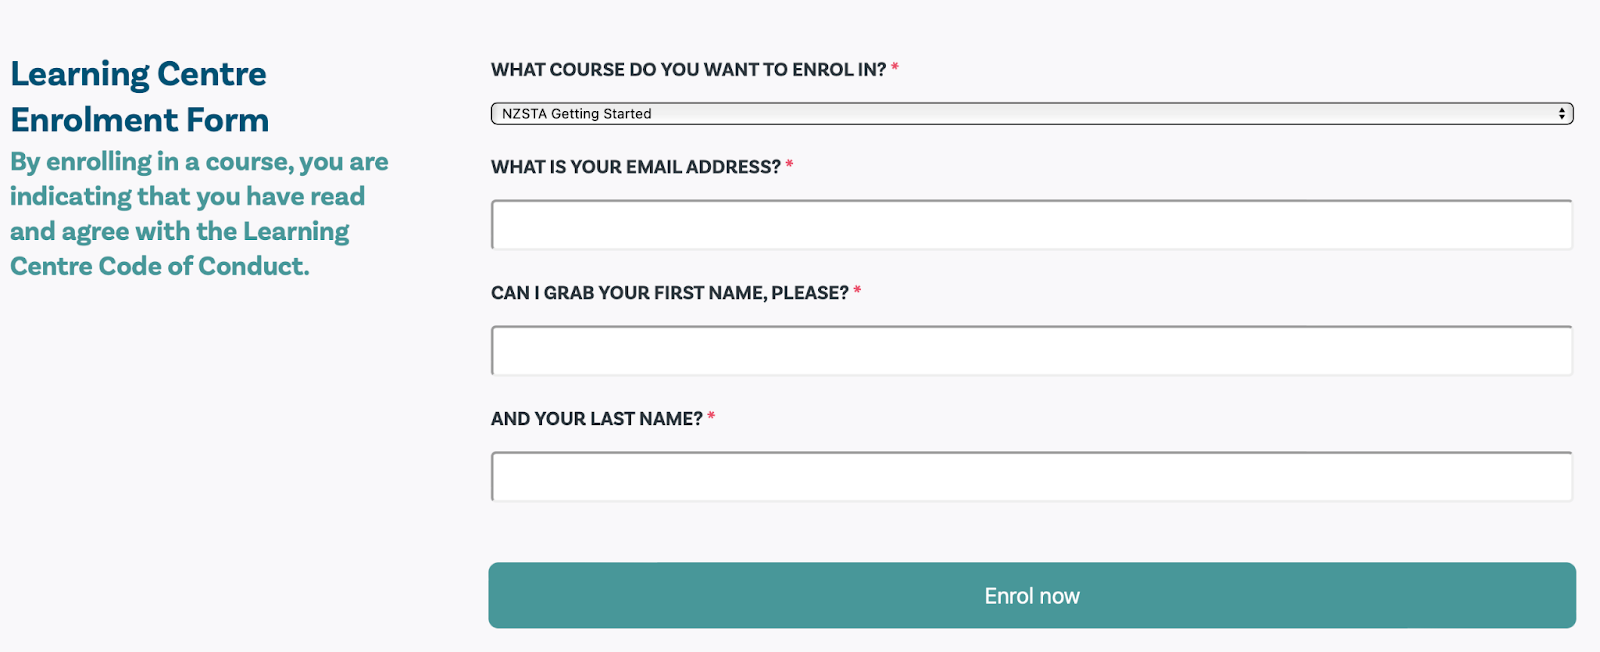 Screenshot of learning centre enrolment form on NZSTA's website. It has a dropdown for course choice and asks people for email address and first and last name.